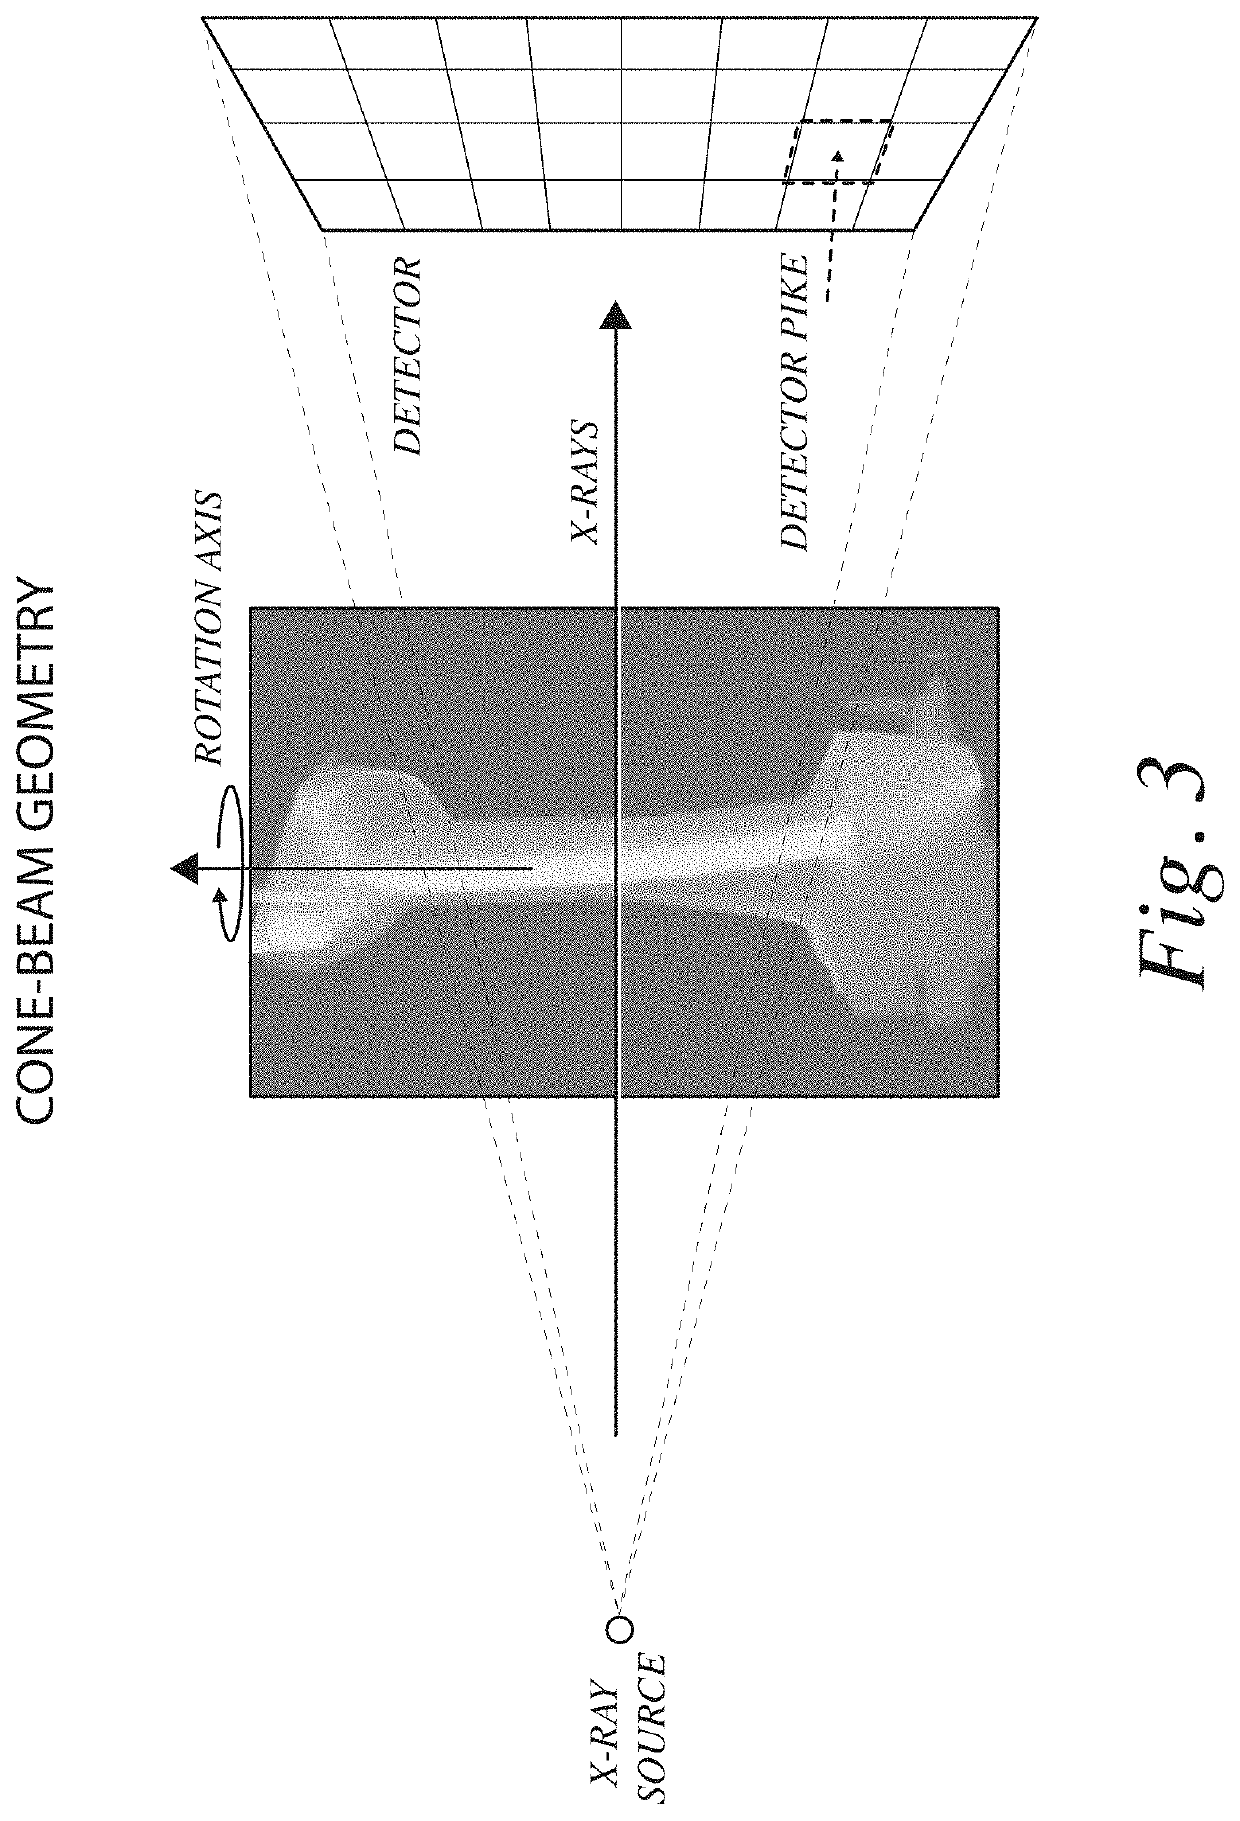 System and method for artifact reduction of computed tomography reconstruction leveraging artificial intelligence and a priori known model for the object of interest